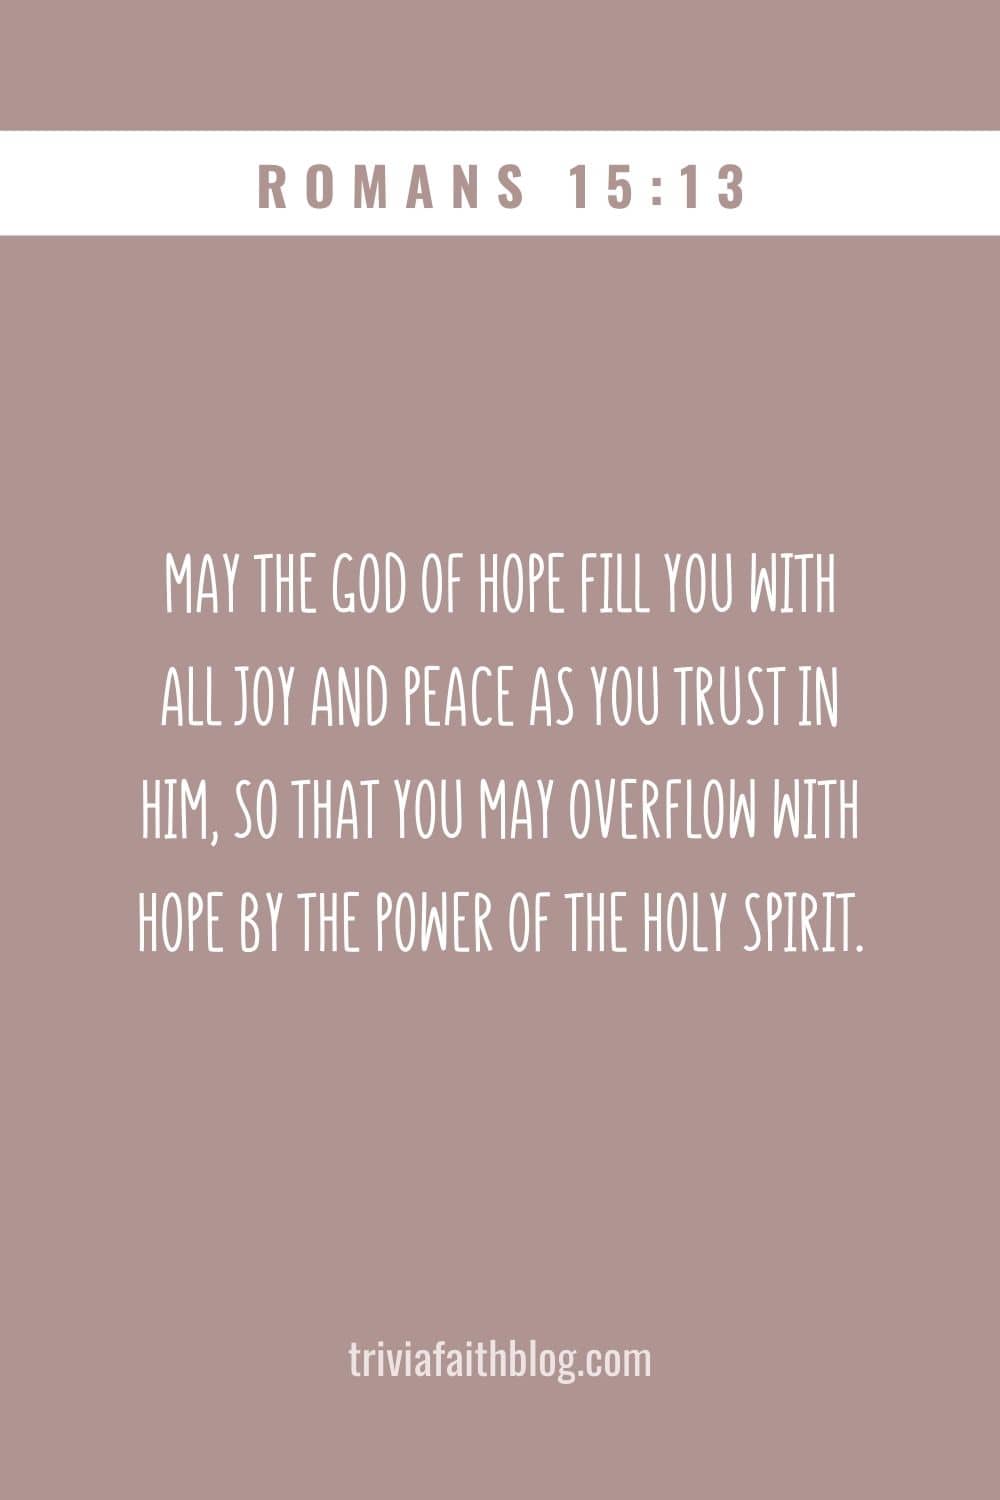 May the God of hope fill you with all joy and peace as you trust in him, so that you may overflow with hope by the power of the Holy Spirit